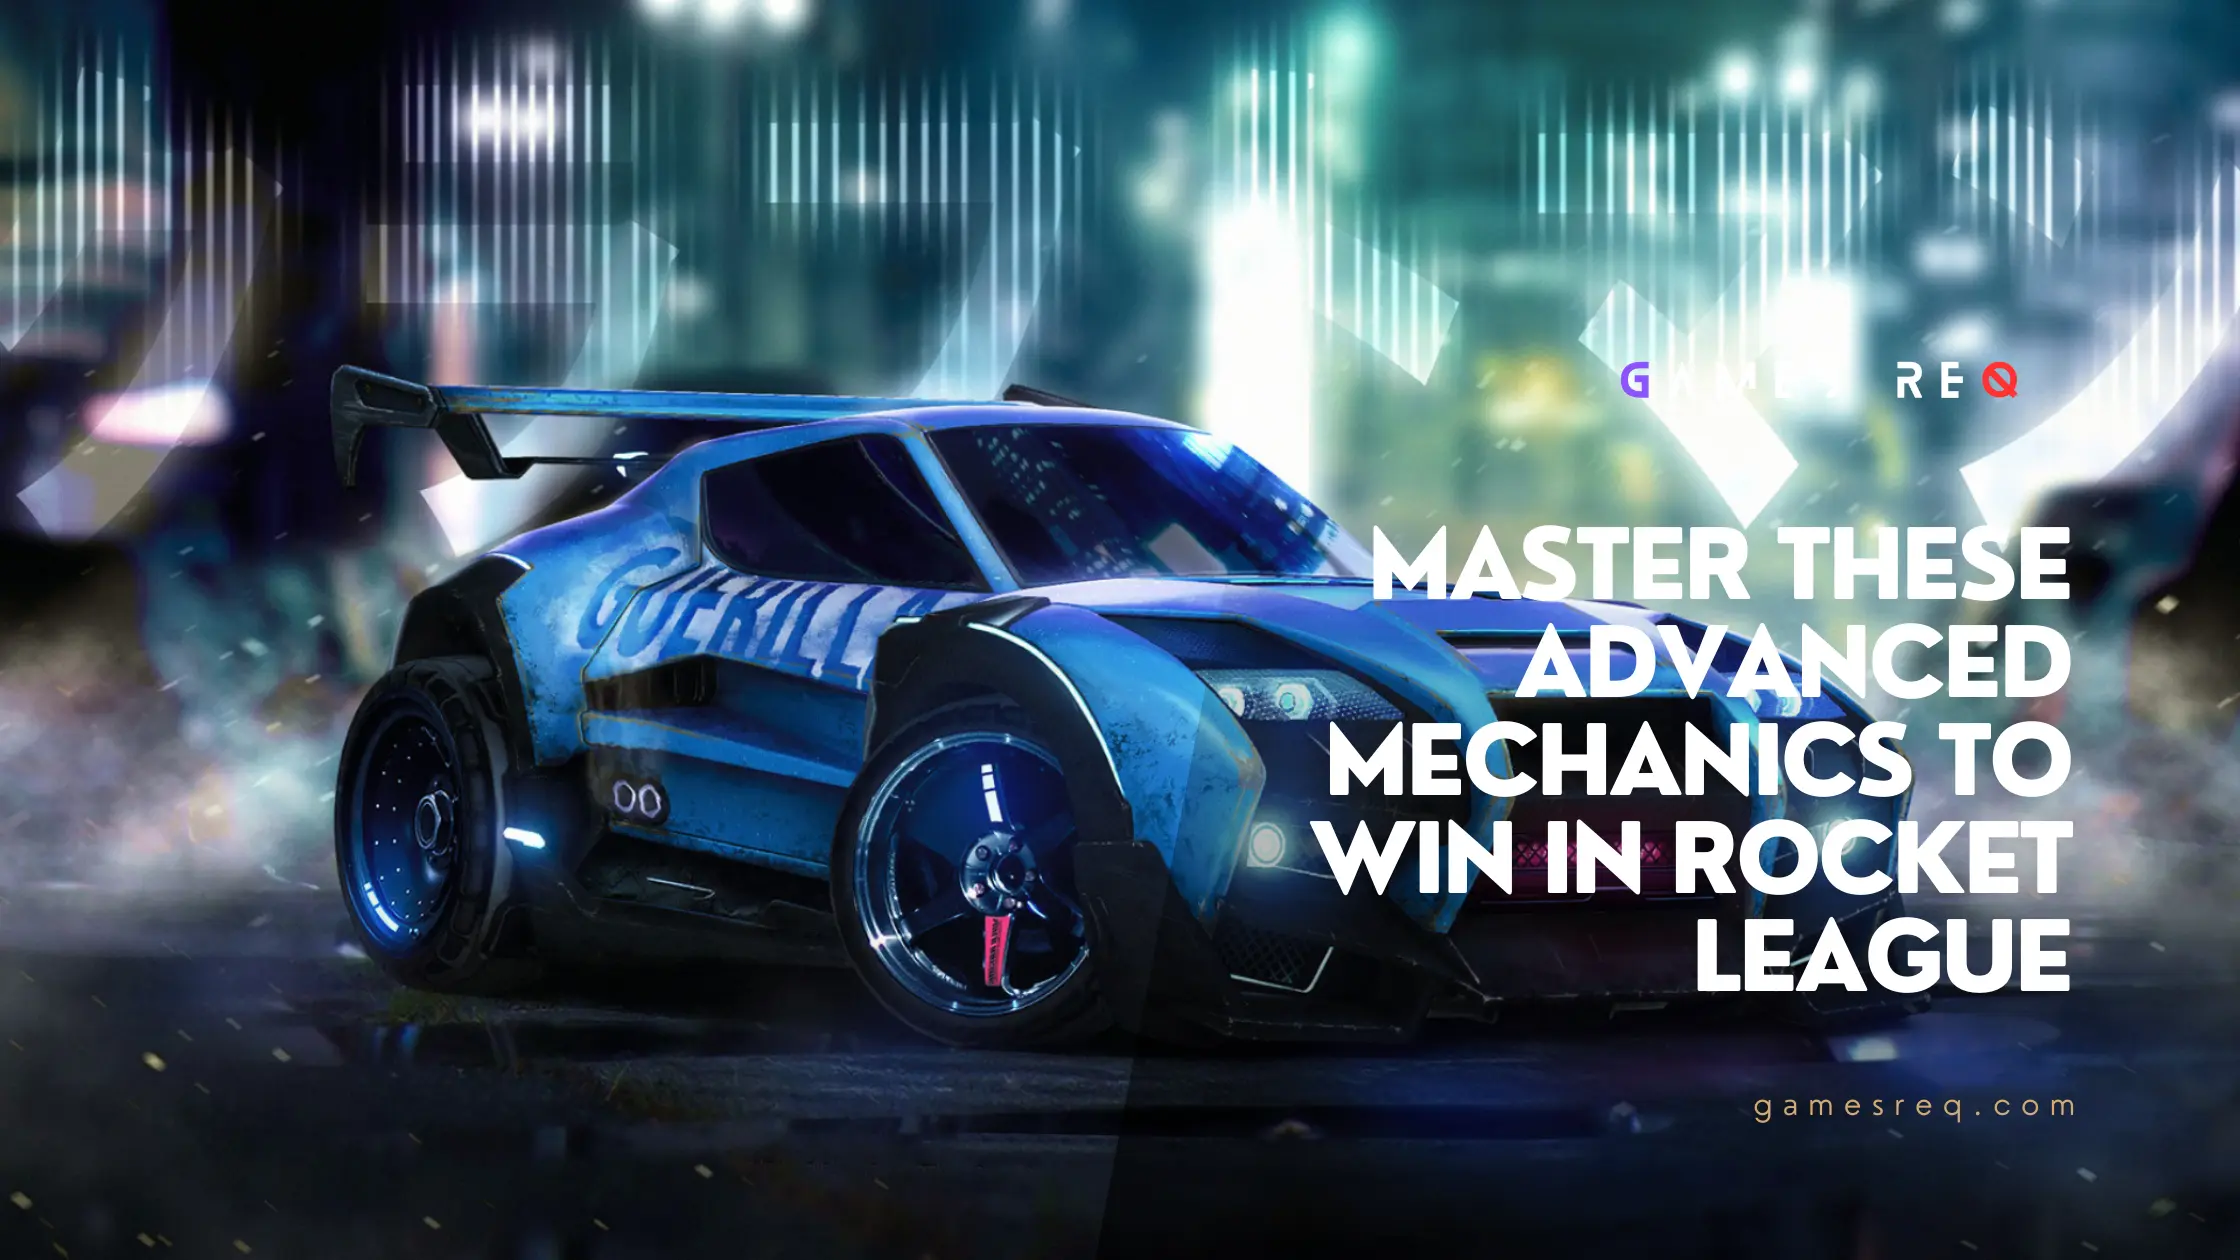 Master These Advanced Mechanics To Win in Rocket League